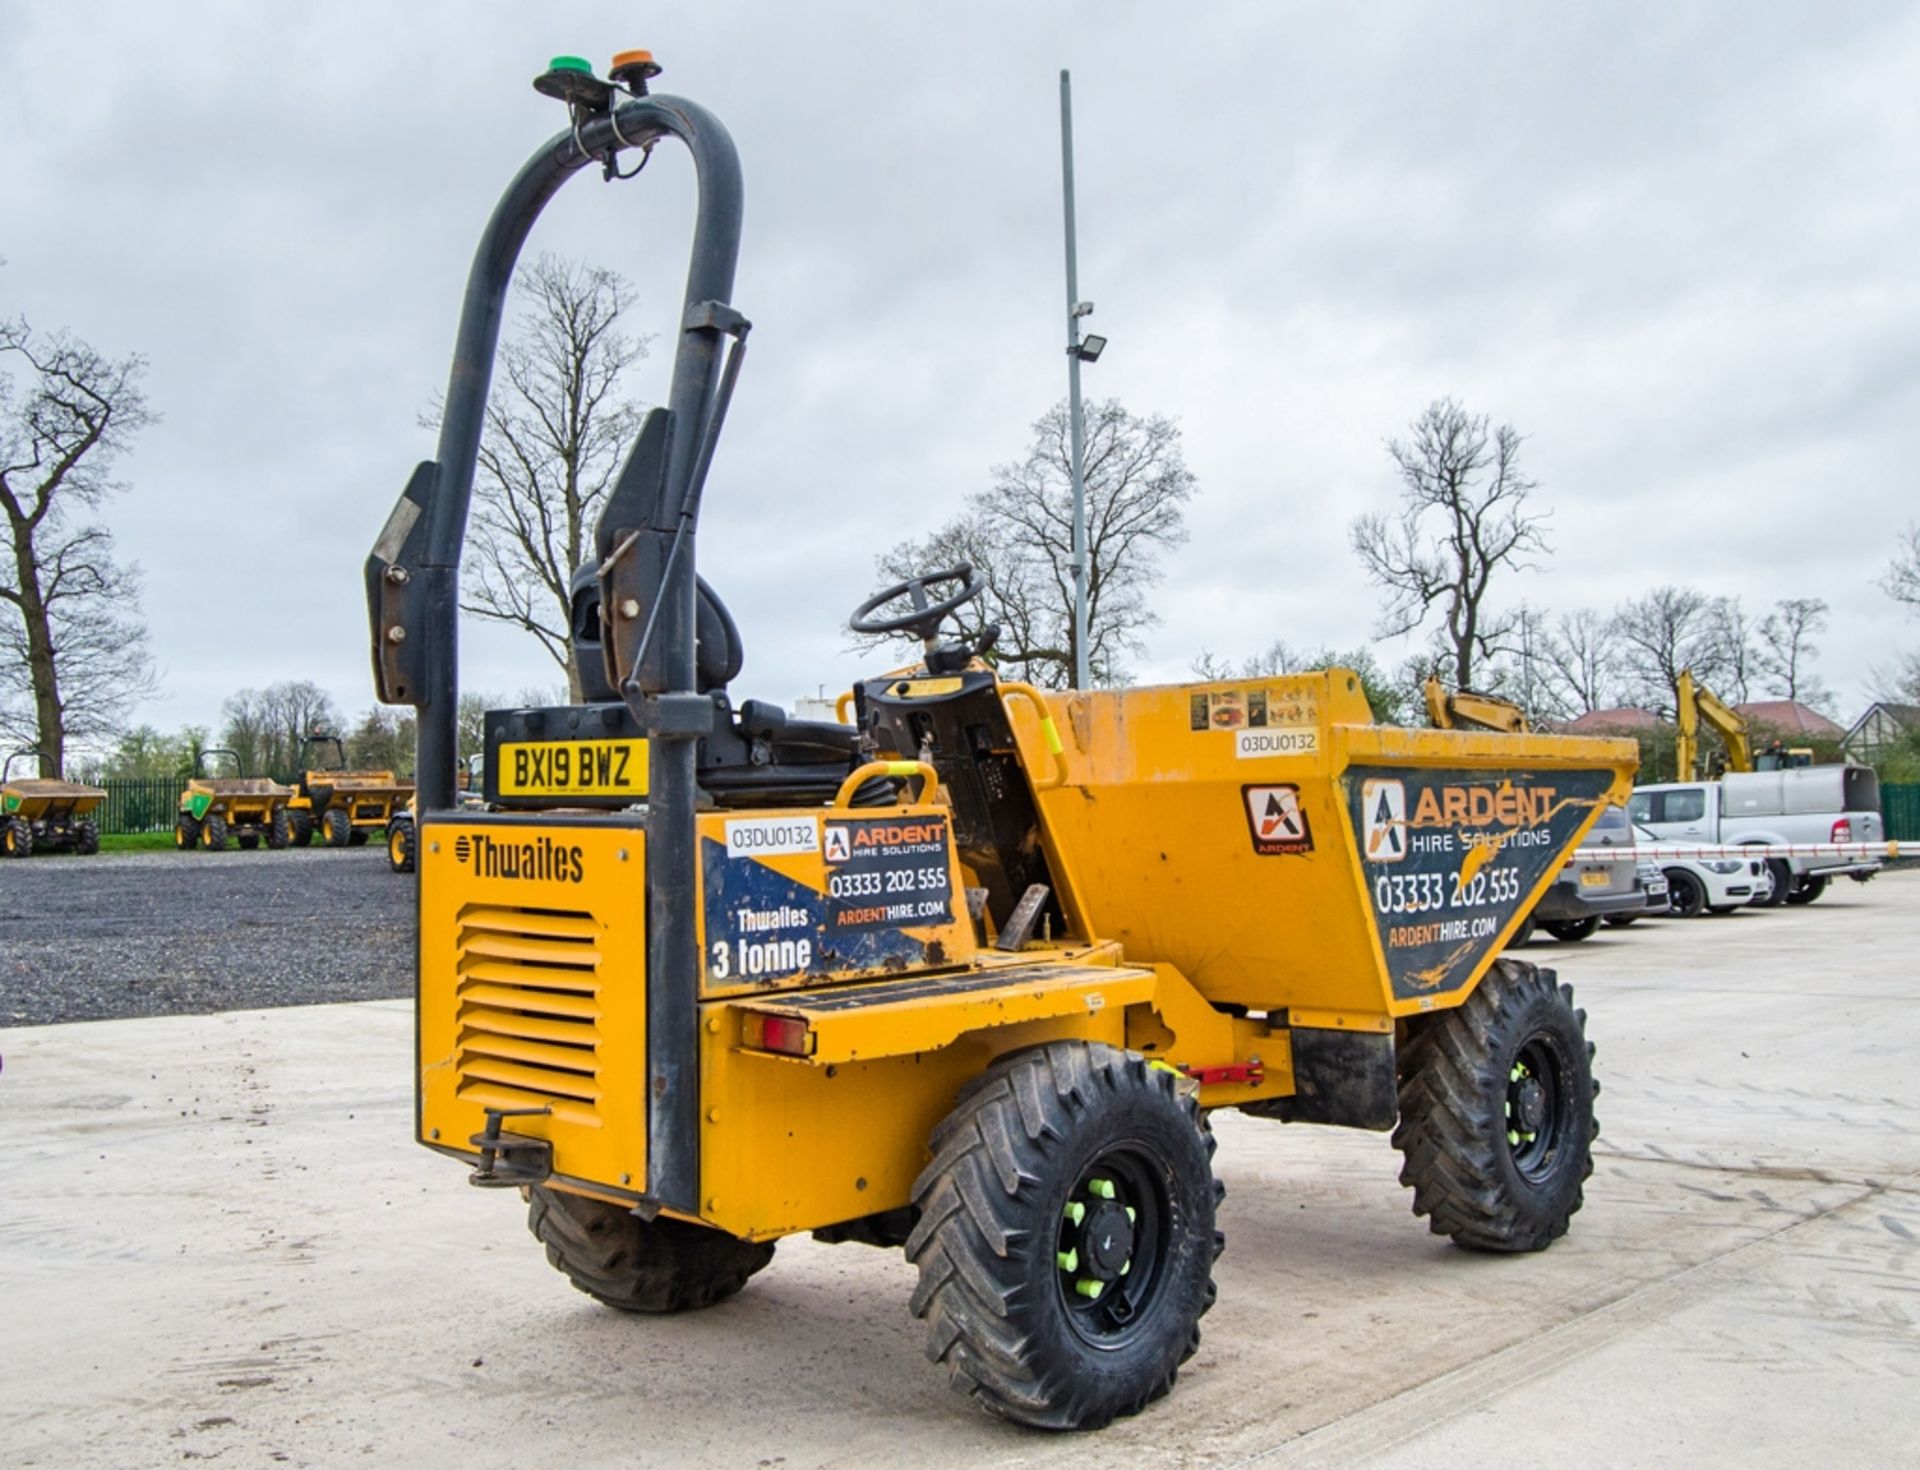 Thwaites 3 tonne straight skip dumper Year: 2019 S/N: 915E5292 Recorded Hours: 27 (Clock faulty) - Image 3 of 22